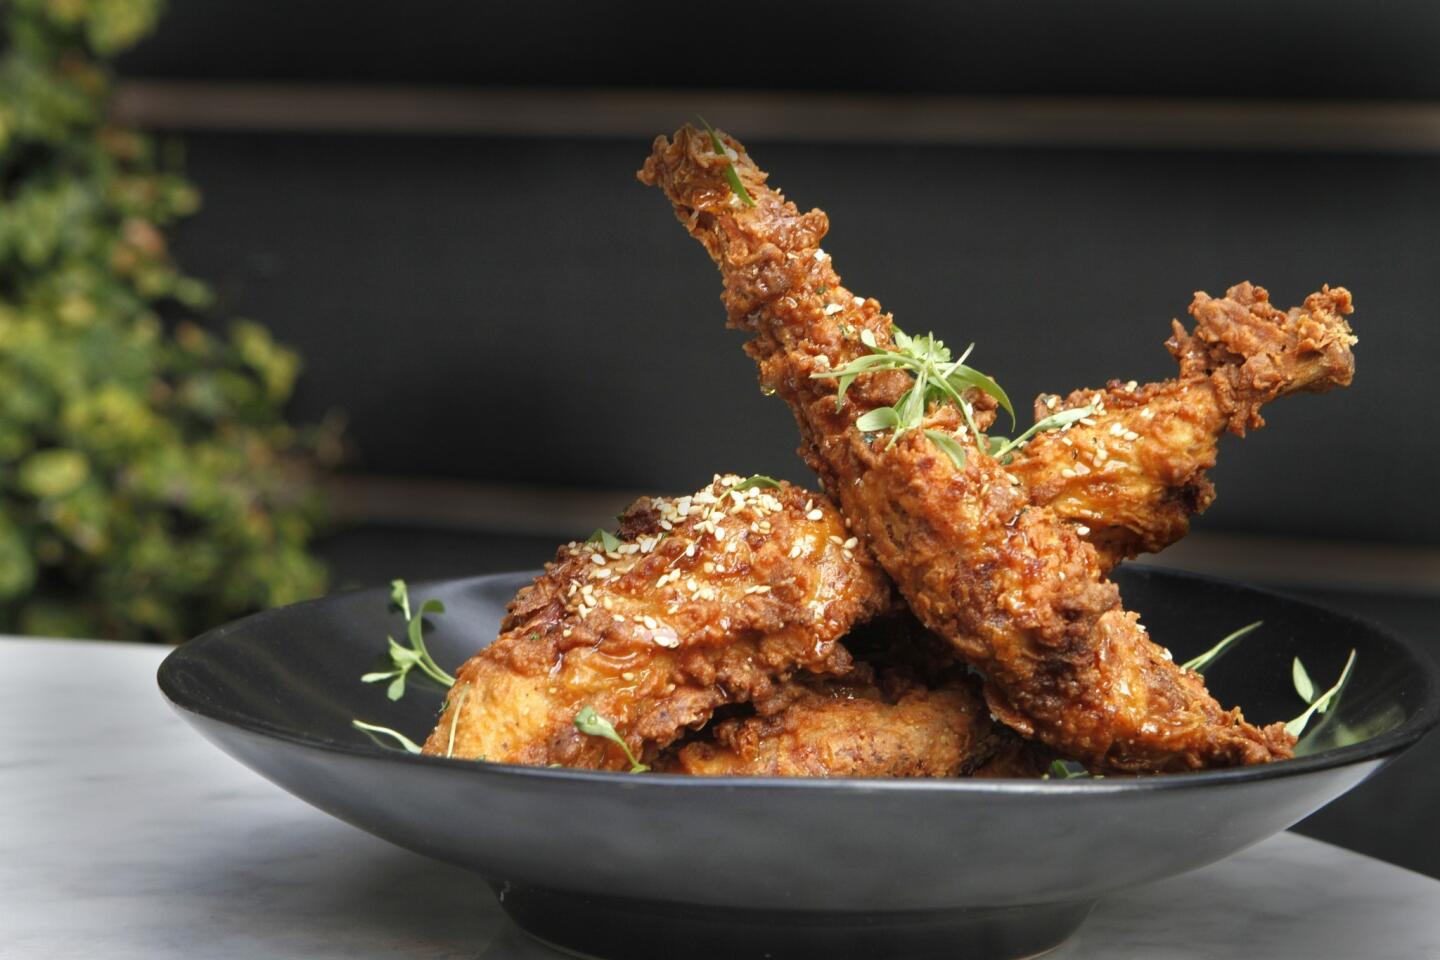 Jonathan Gold says the chicken fried rabbit, which is brushed with honey, is even better than the fried chicken served at the Ladies' Gunboat Society.